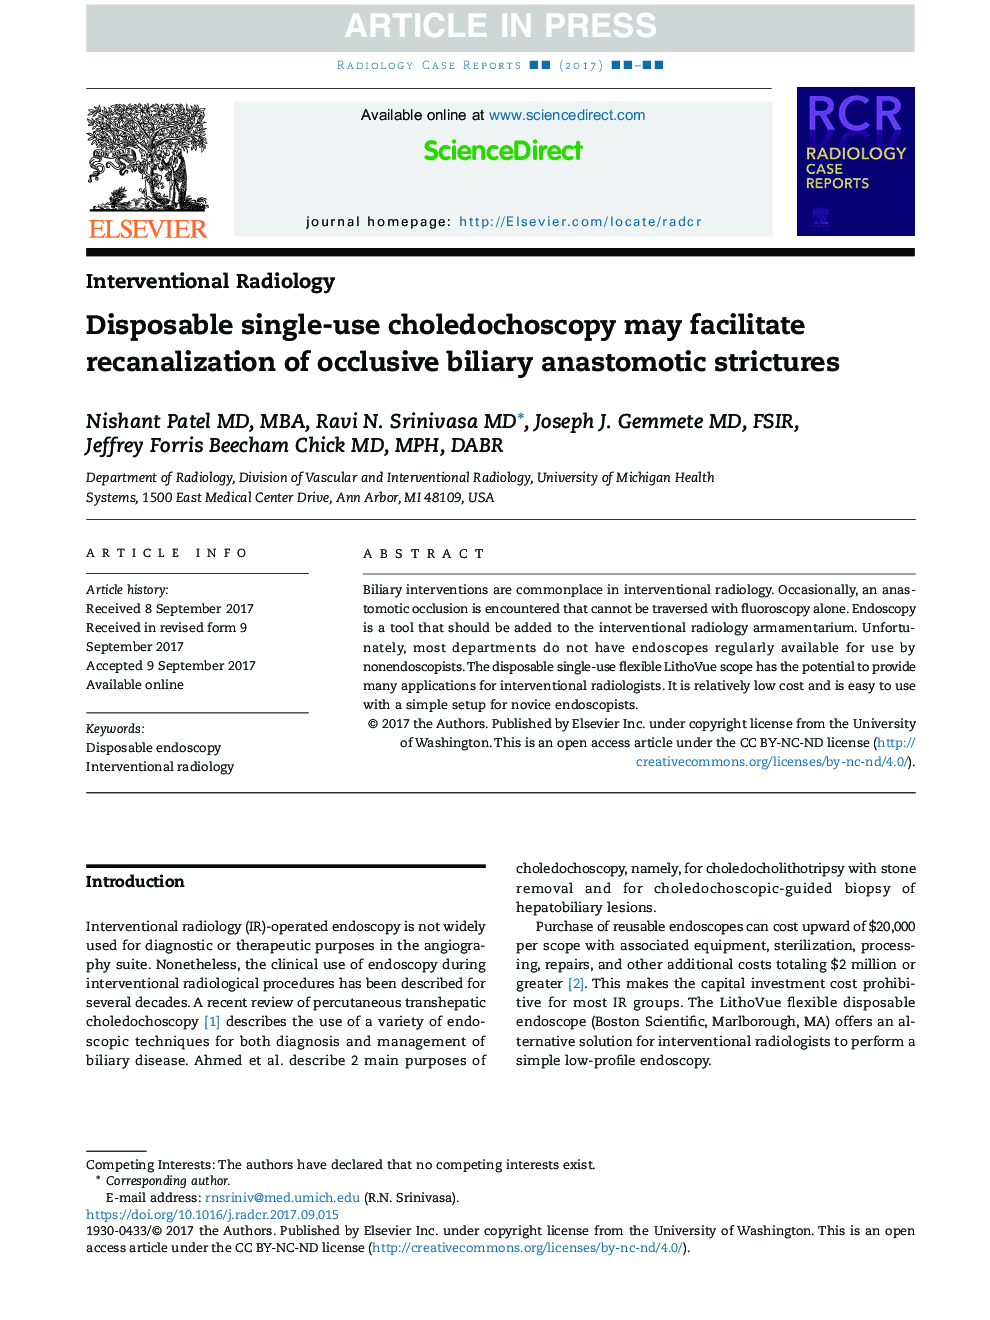 Disposable single-use choledochoscopy may facilitate recanalization of occlusive biliary anastomotic strictures